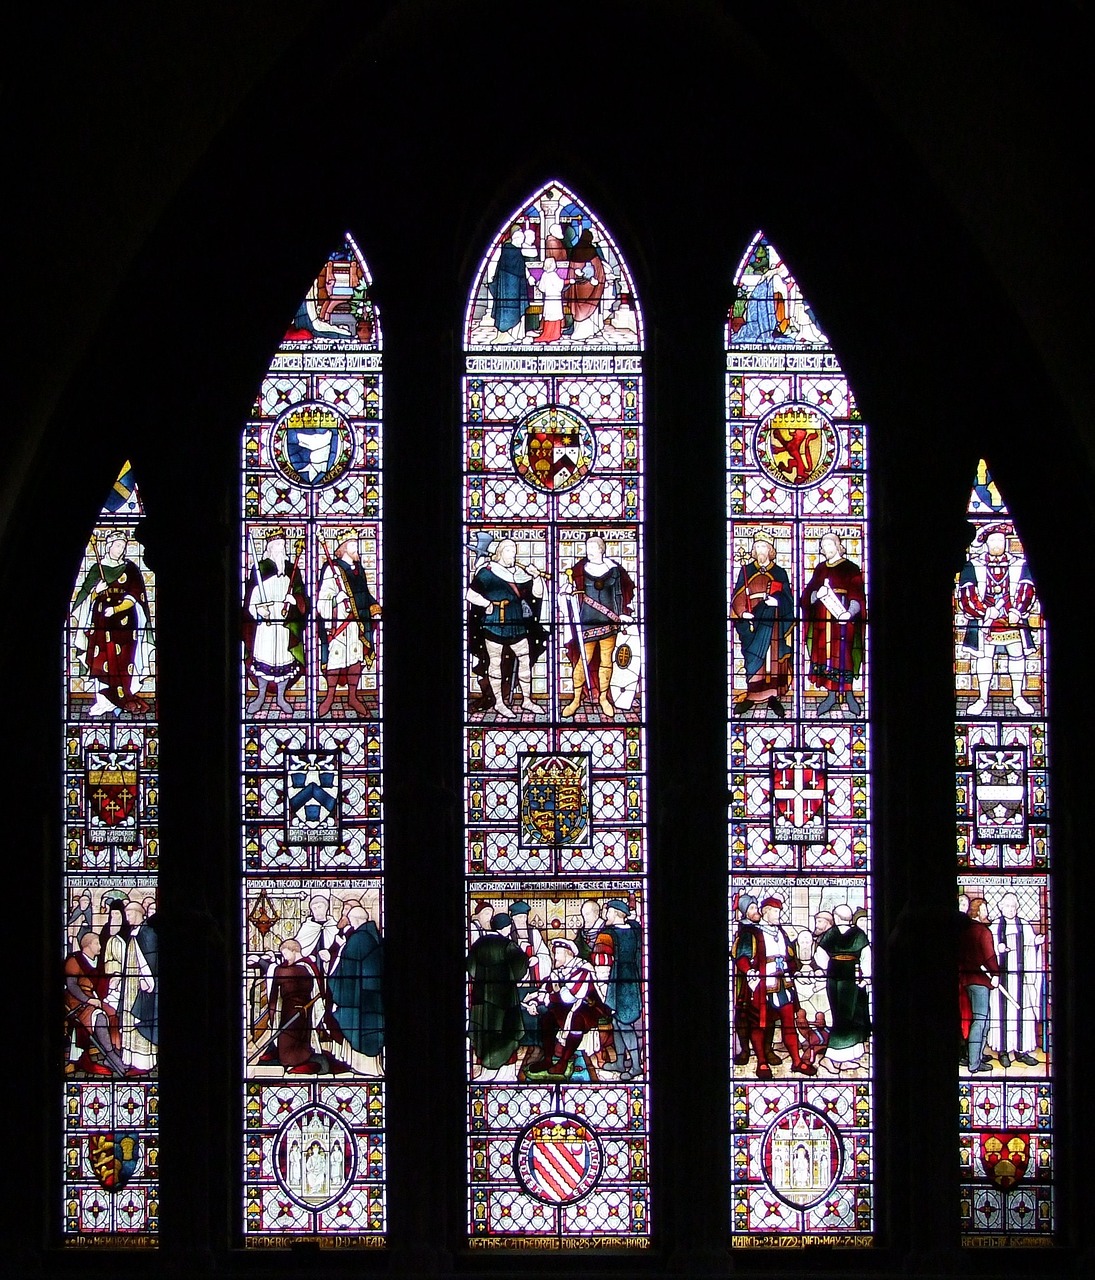 chester cathedral, ansor frederick, memorial-876196.jpg